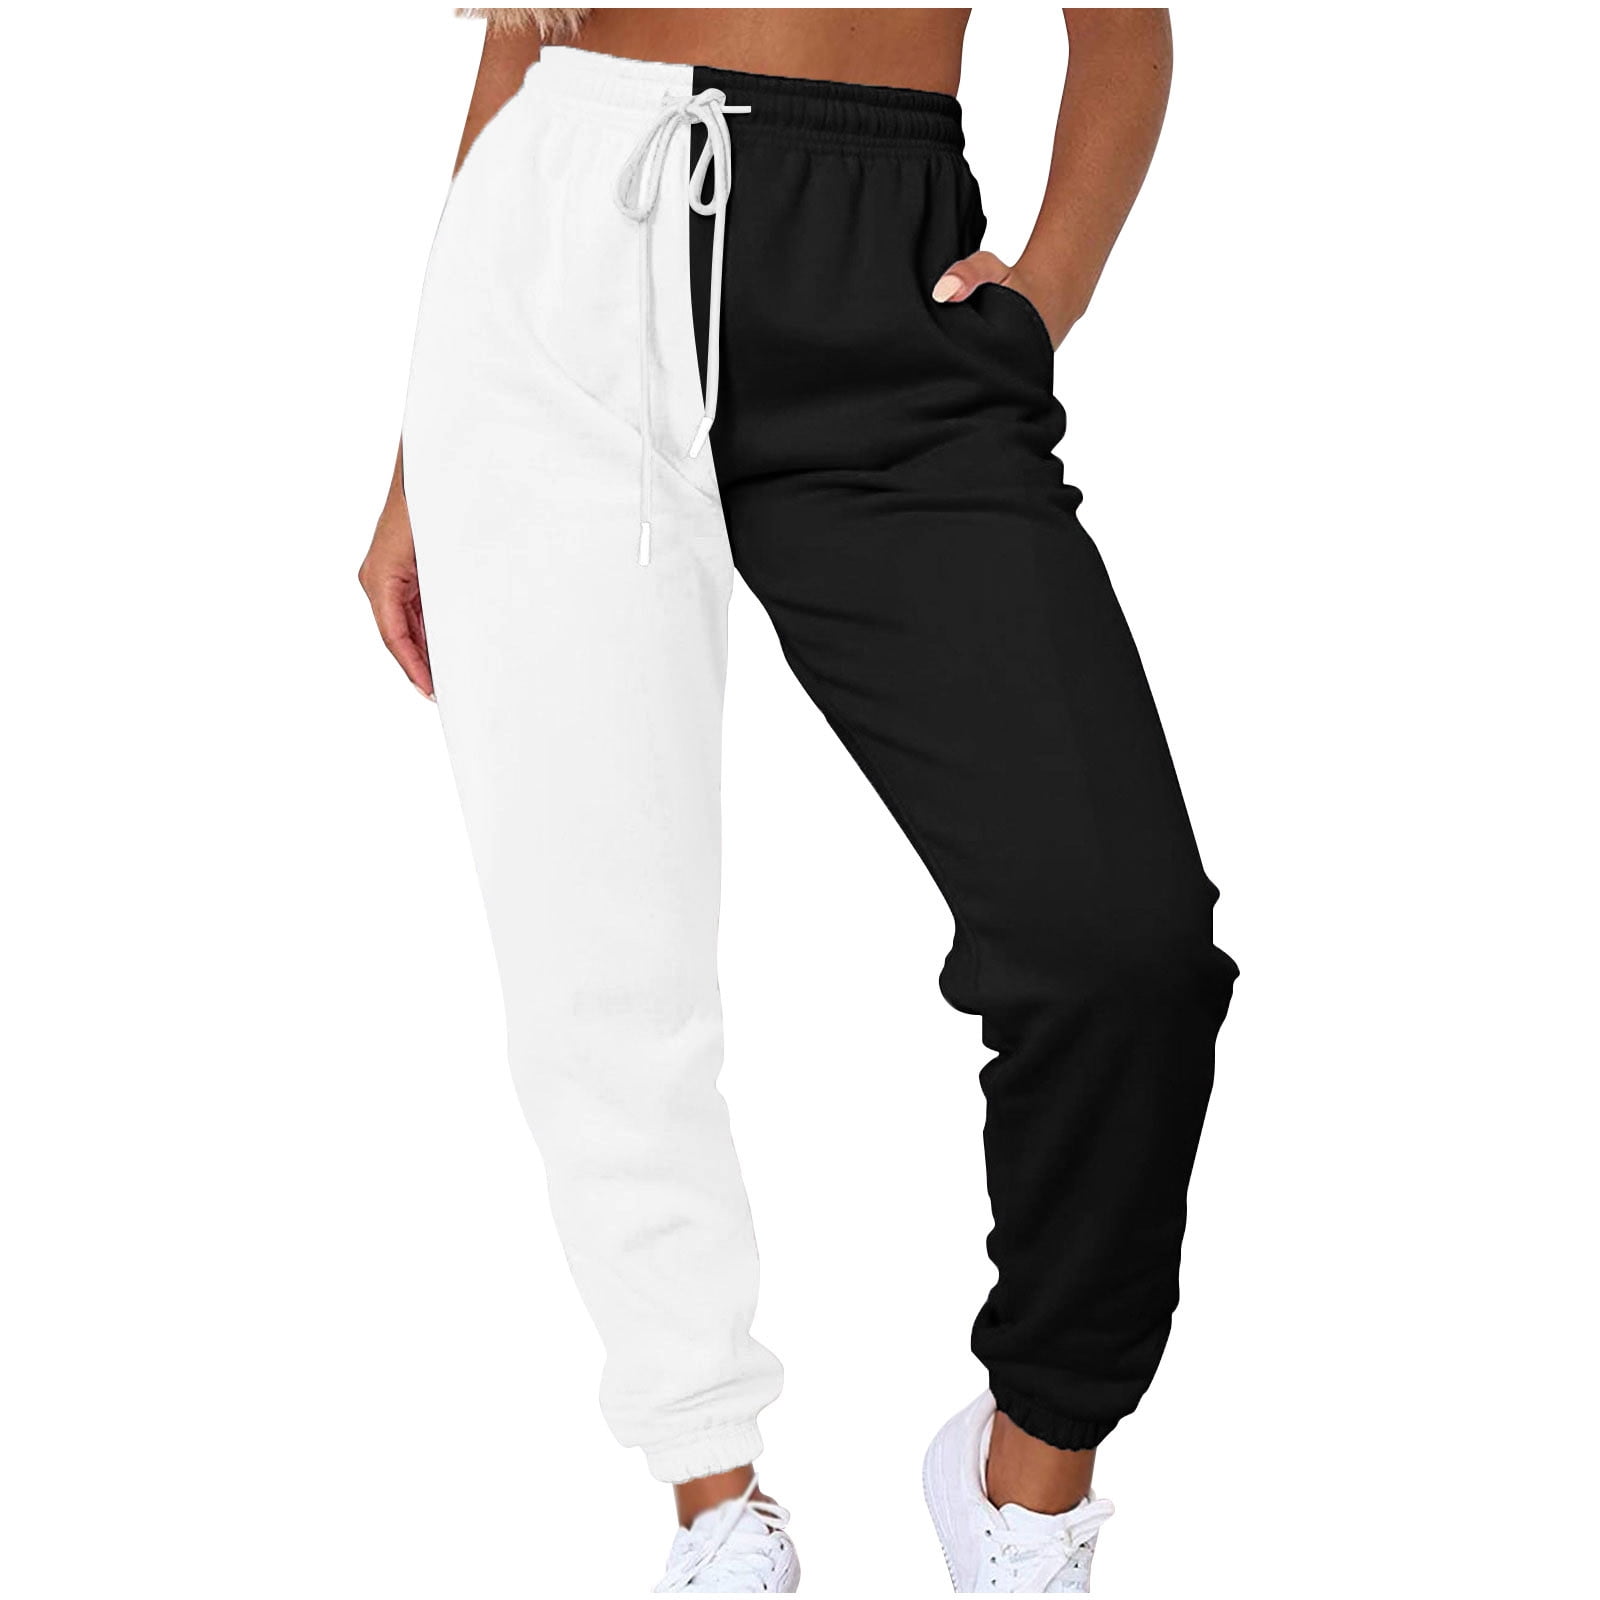 XFLWAM Women's Elastic High Waist Drawstring Joggers Pants Color Block Baggy  Sweatpants with Pockets Gym Running Pants Red M 